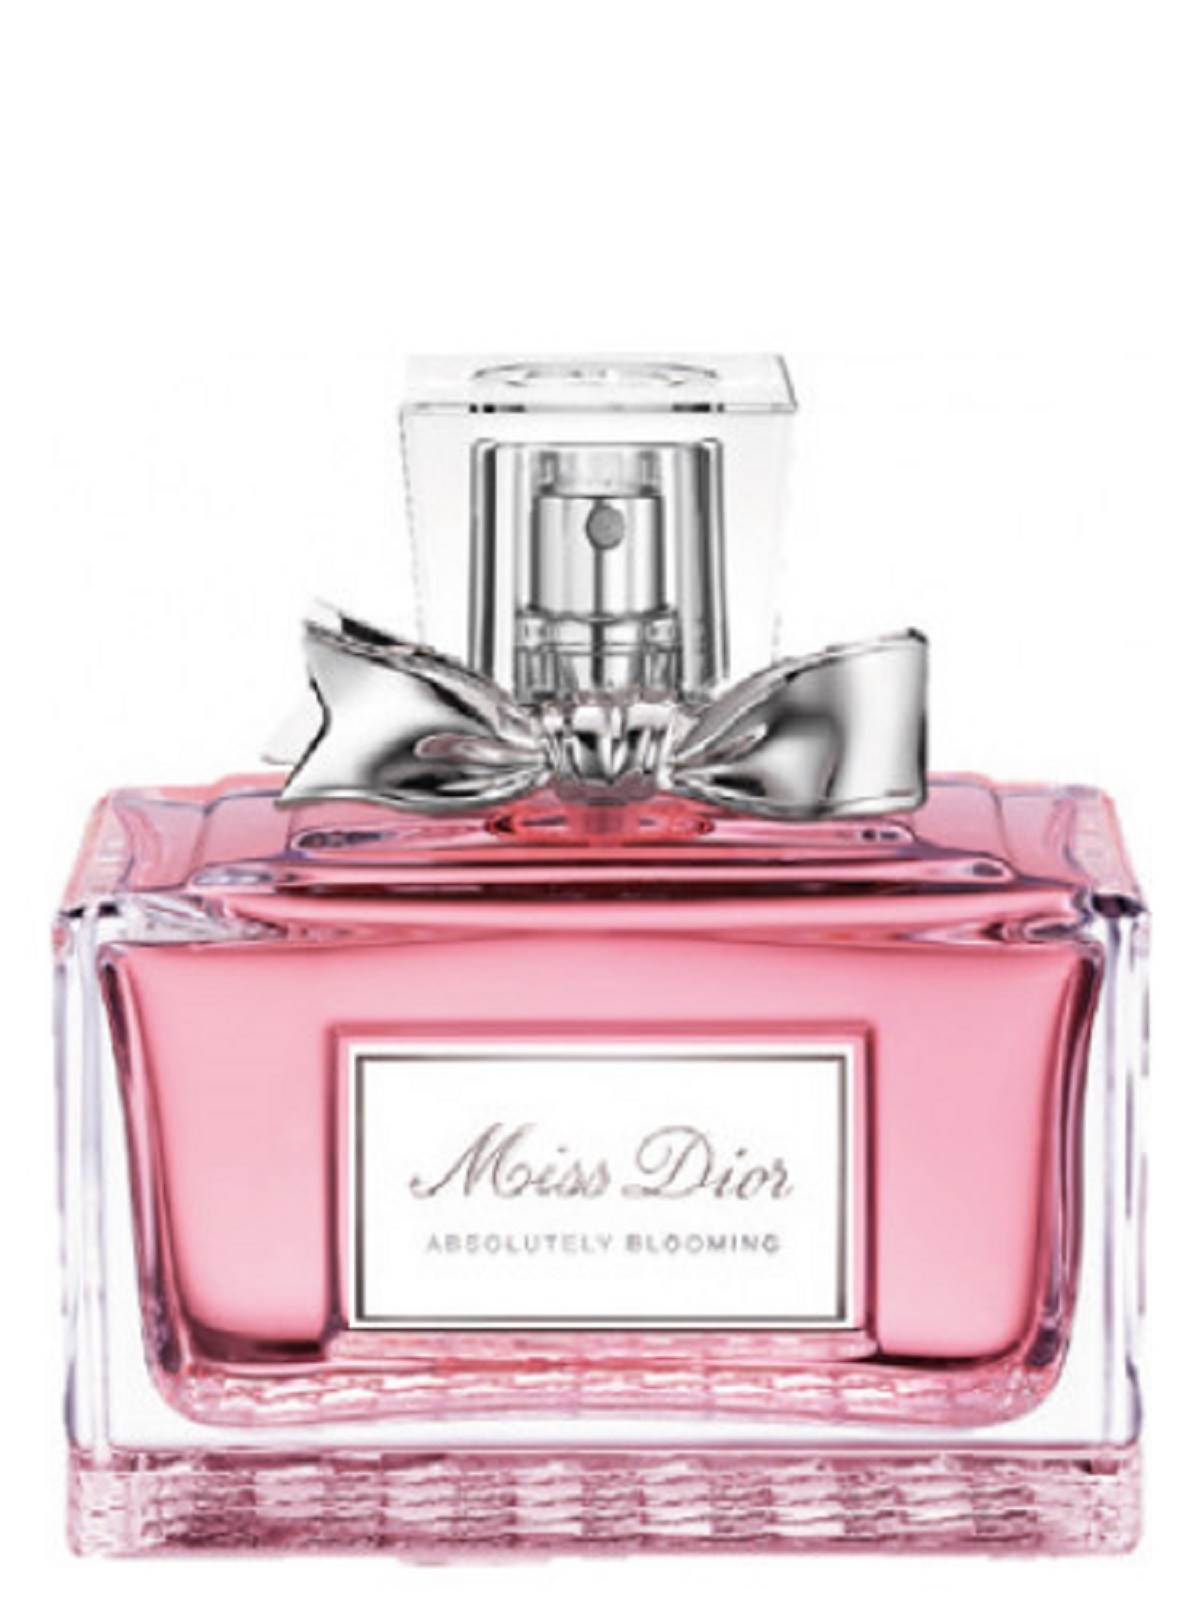  Miss Dior Absolutely Blooming, Christian Dior 